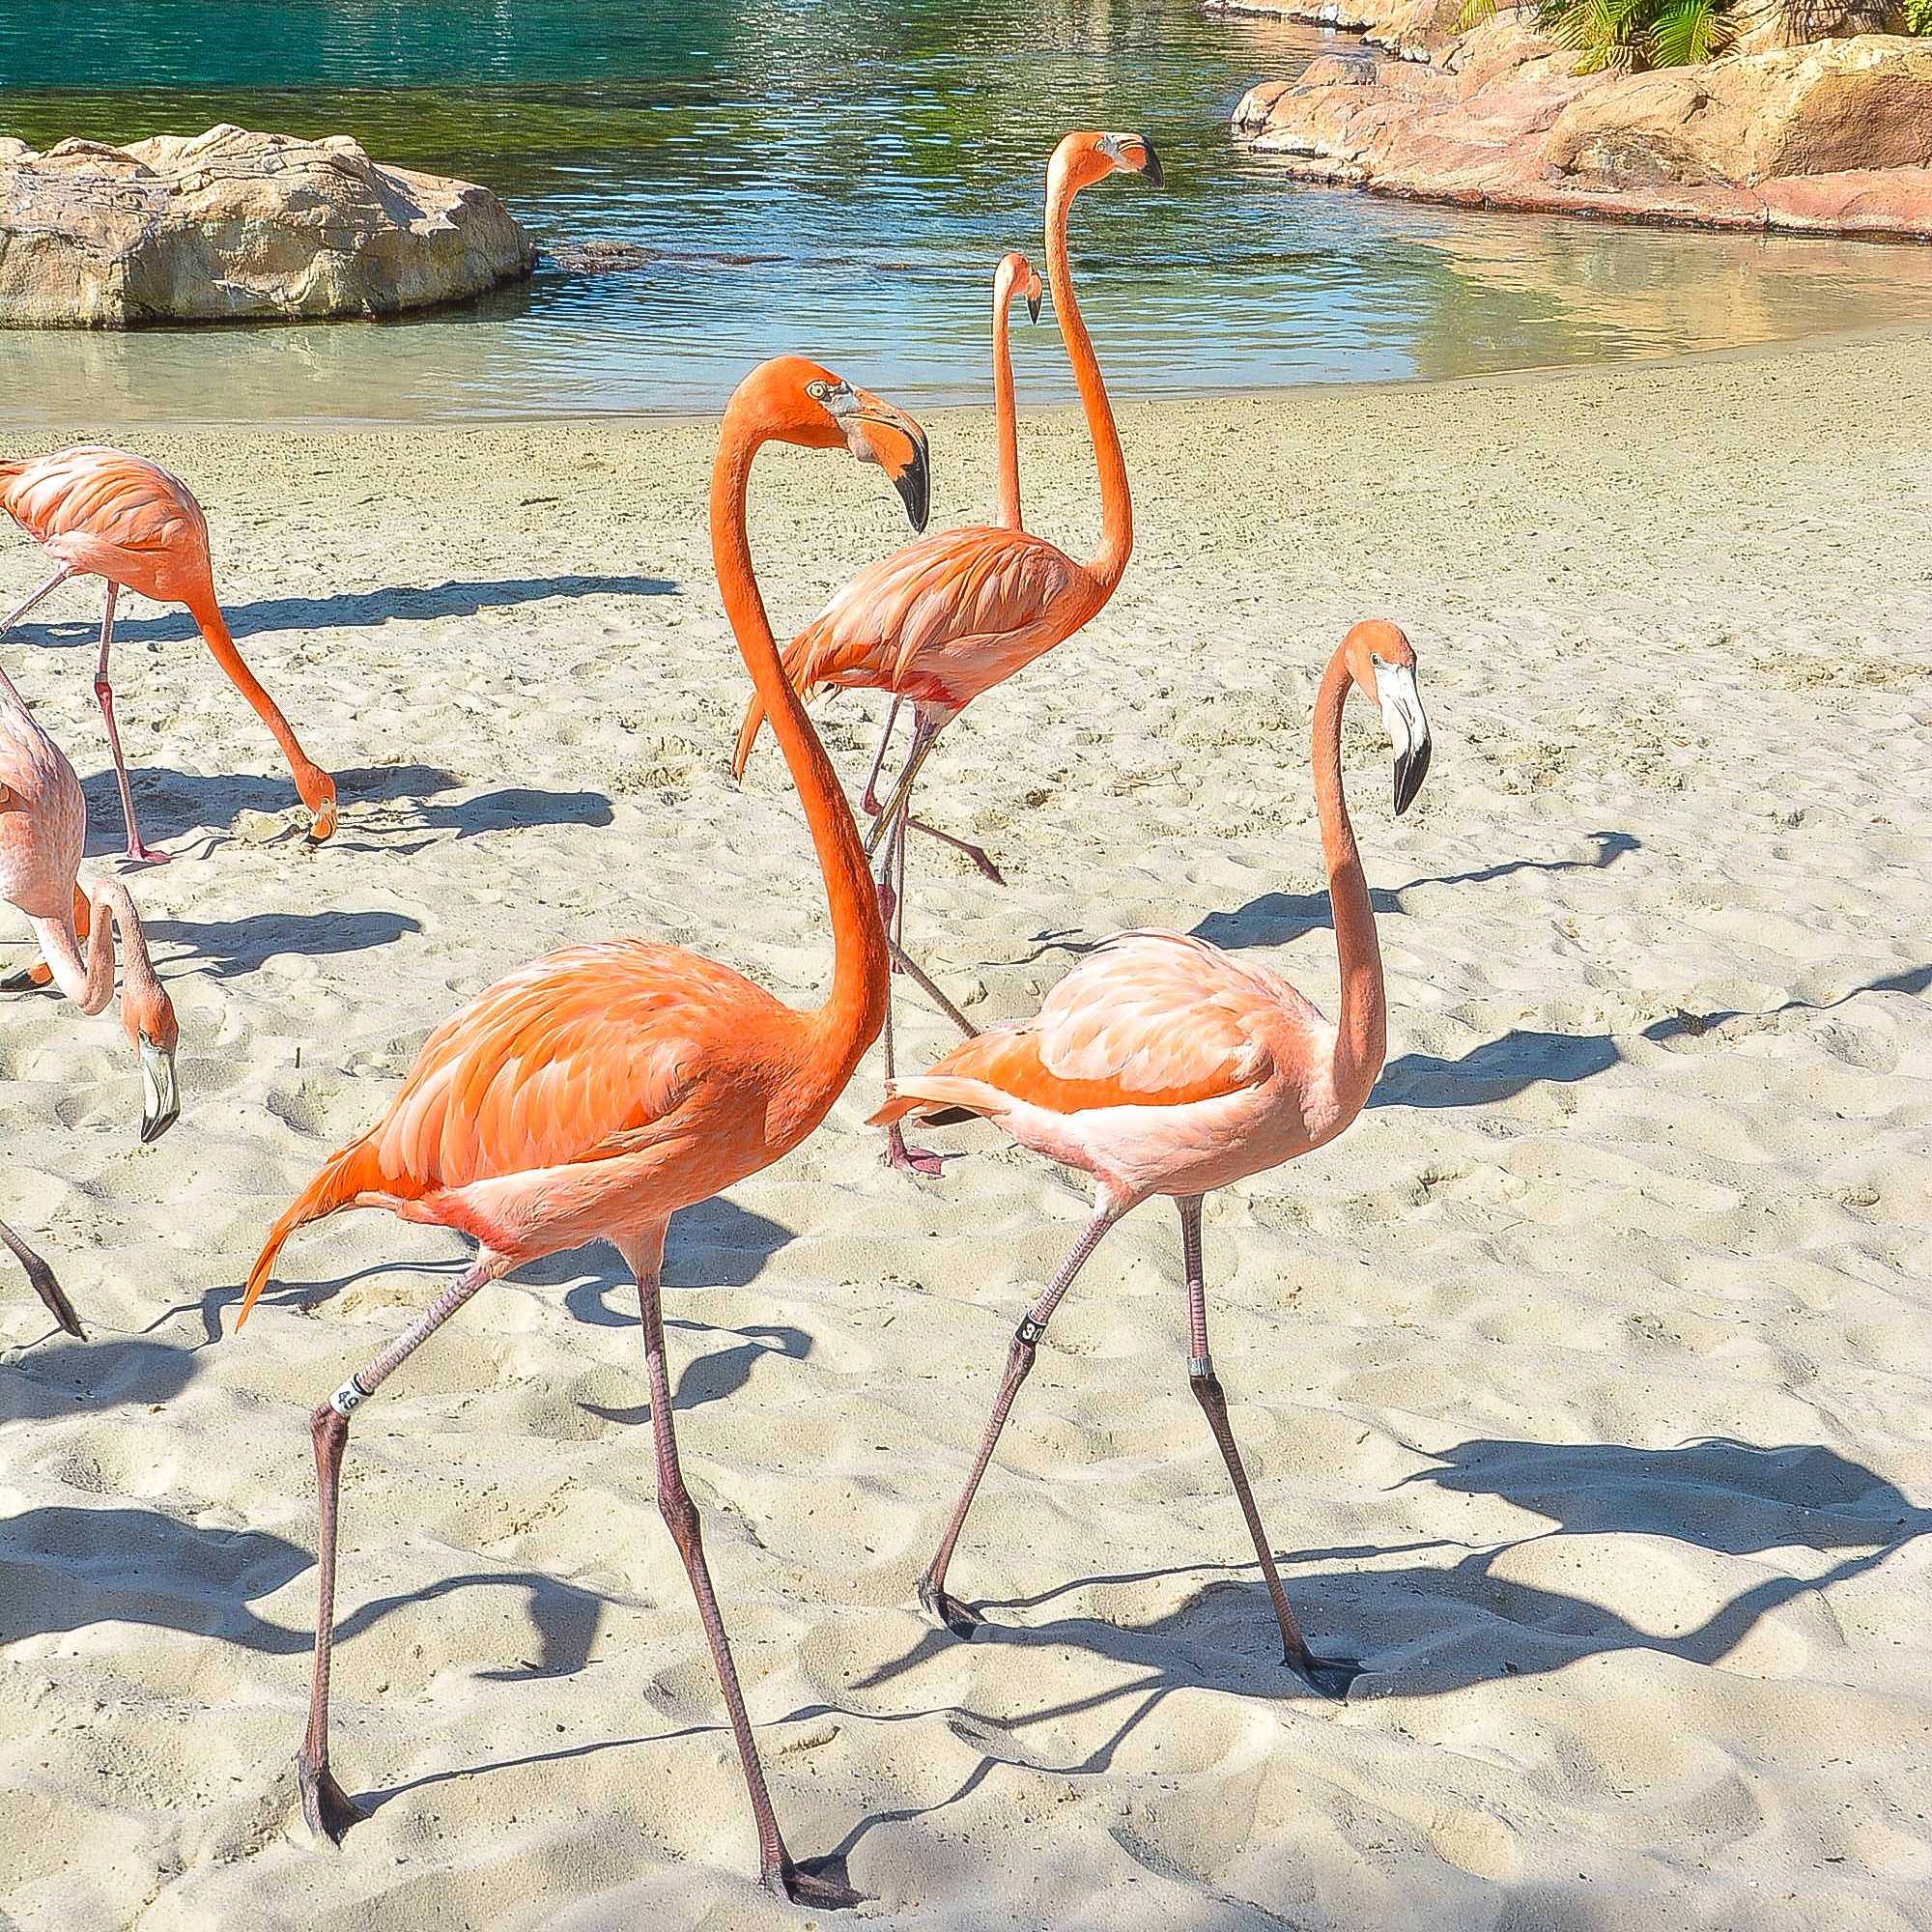 Discovery Cove Sees Flamboyance Of Flamingos